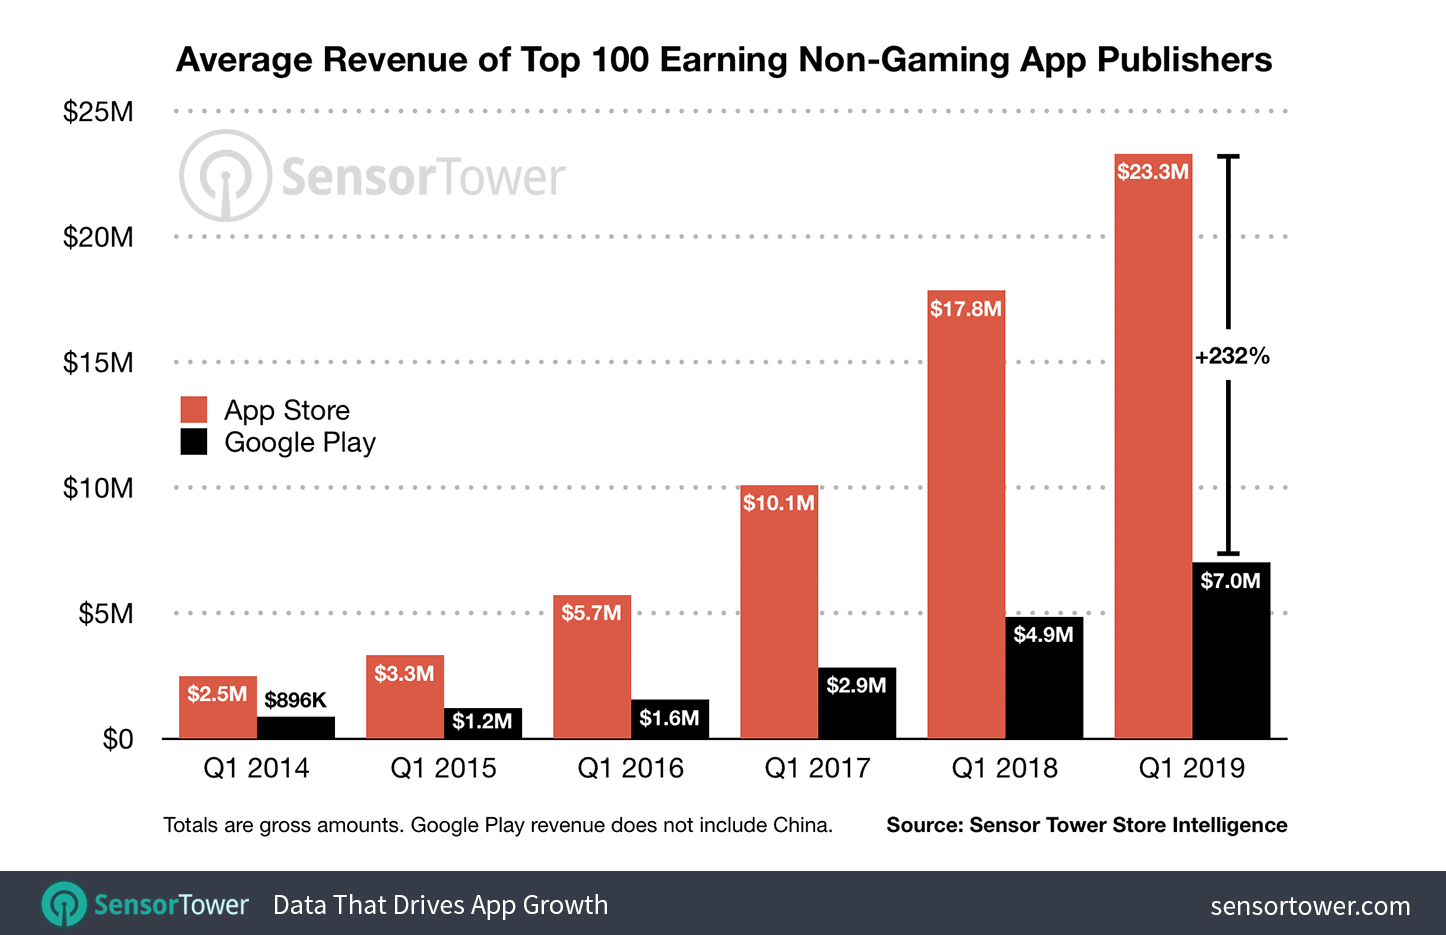 Revenue from top 100 non-gaming apps on iOS and Android - The Apple App Store continues to outperform the Google Play Store